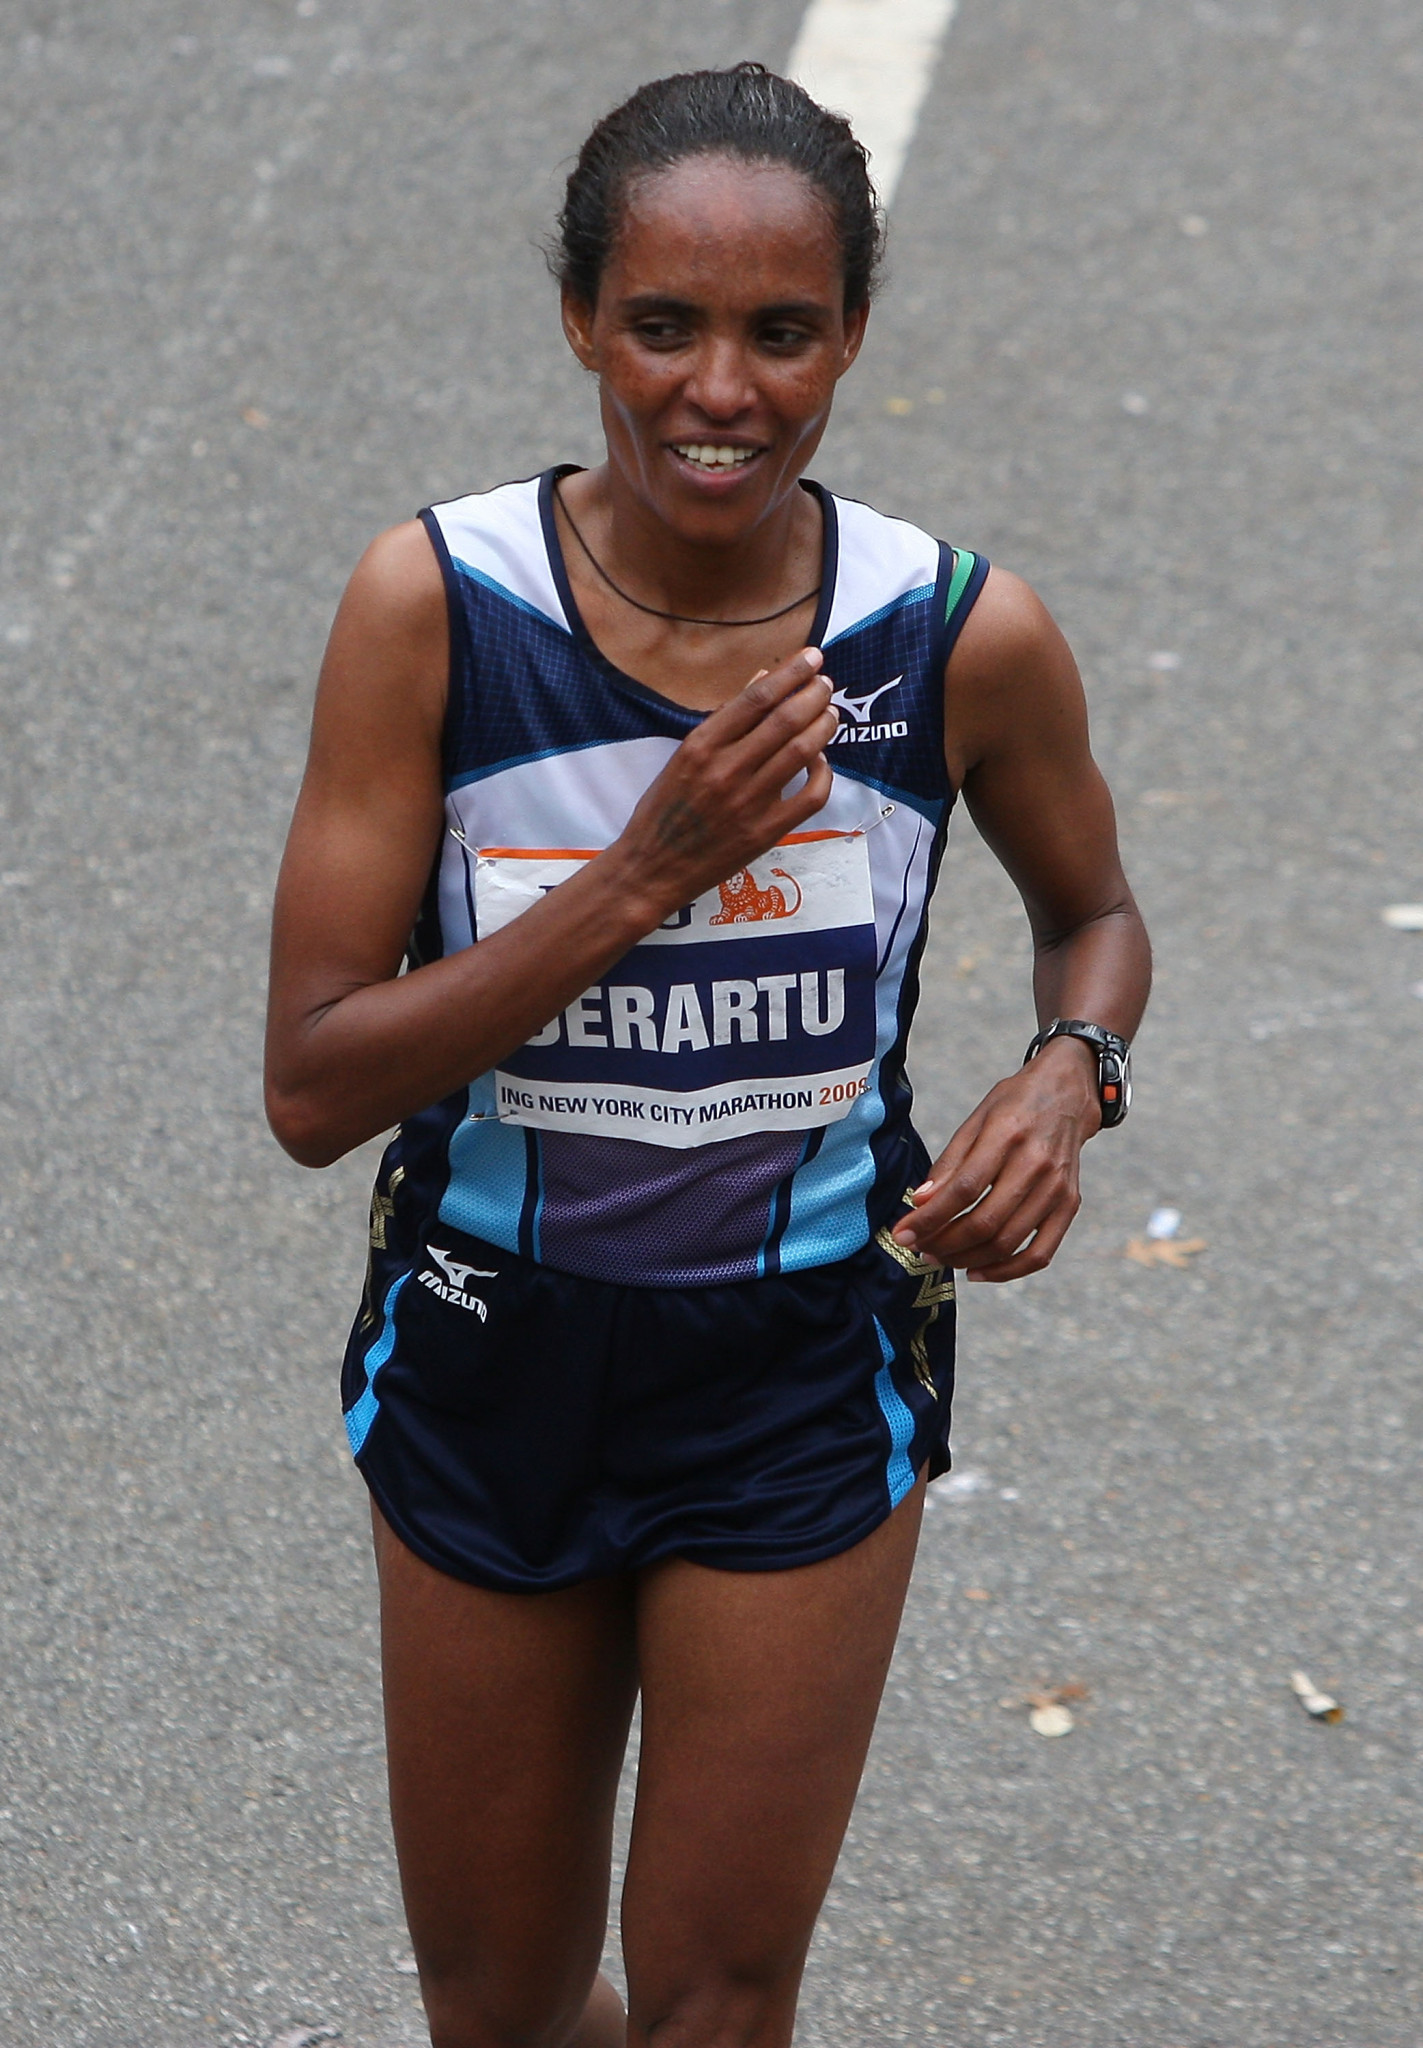 Double Olympic 10,000m champion Derartu Tulu, pictured winning the women's title at the 2009 New York City marathon, will take over the Presidency of the Ethiopian Athletics Federation following Haile Gebrselassie's resignation ©Getty Images  